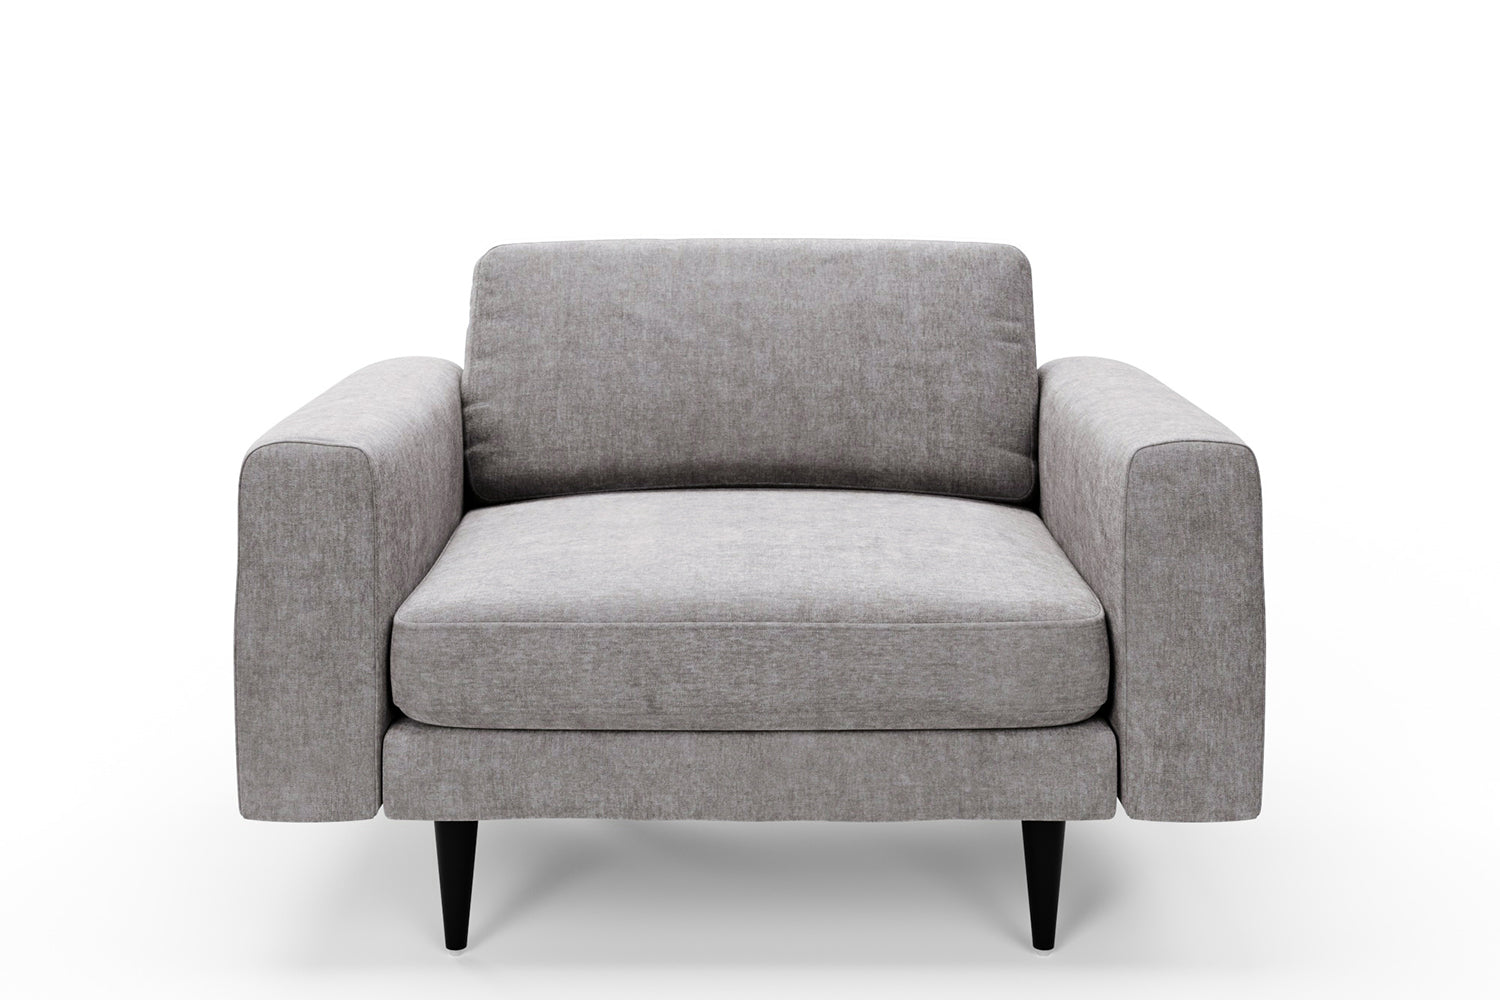 SNUG | The Big Chill 1.5 Seater Snuggler in Mid Grey variant_40414875713584